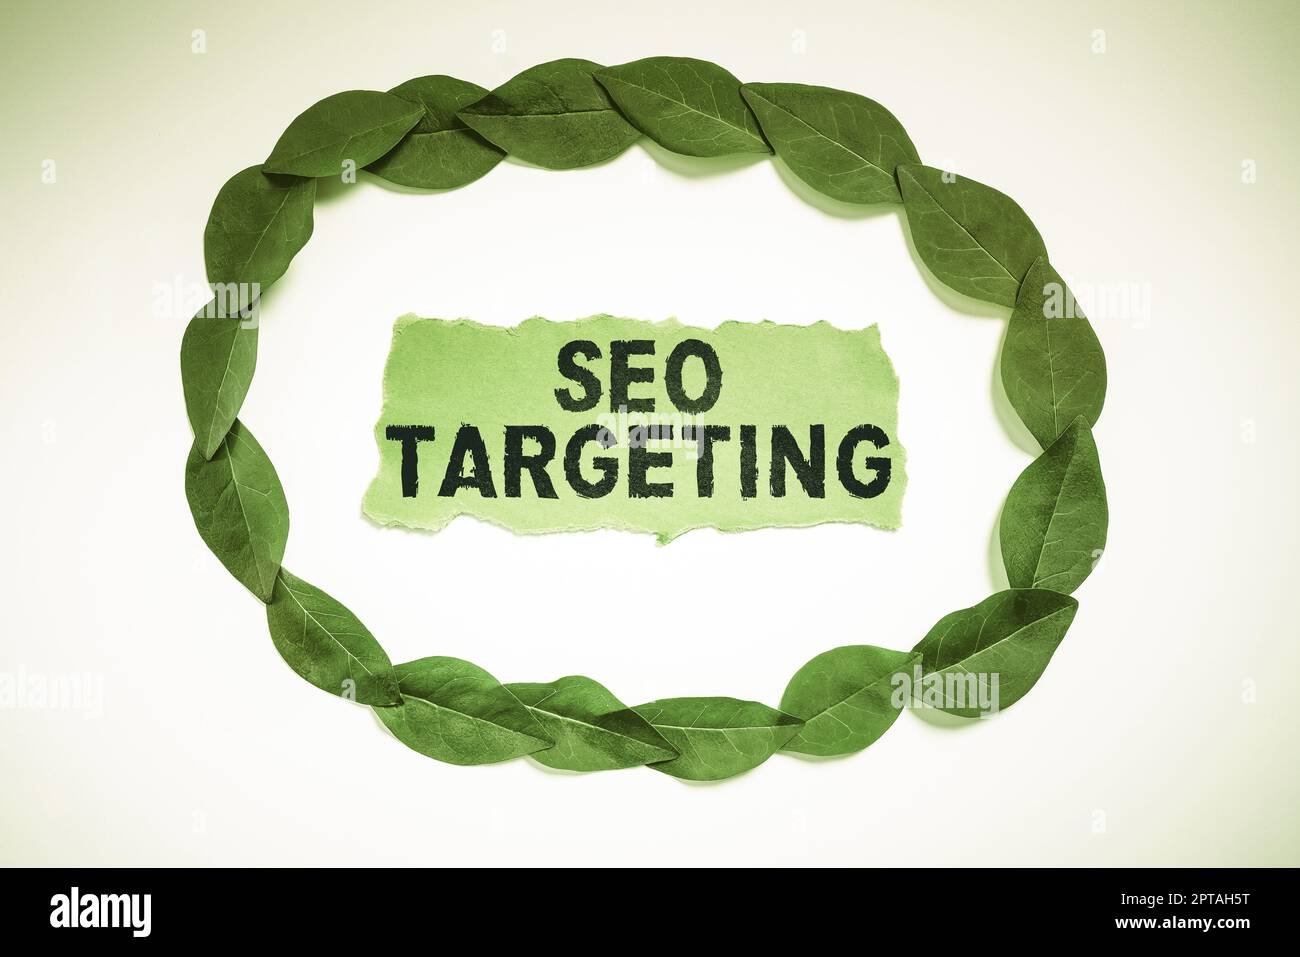 Text sign showing Seo Targeting, Conceptual photo Specific Keywords for Location Landing Page Top Domain Stock Photo